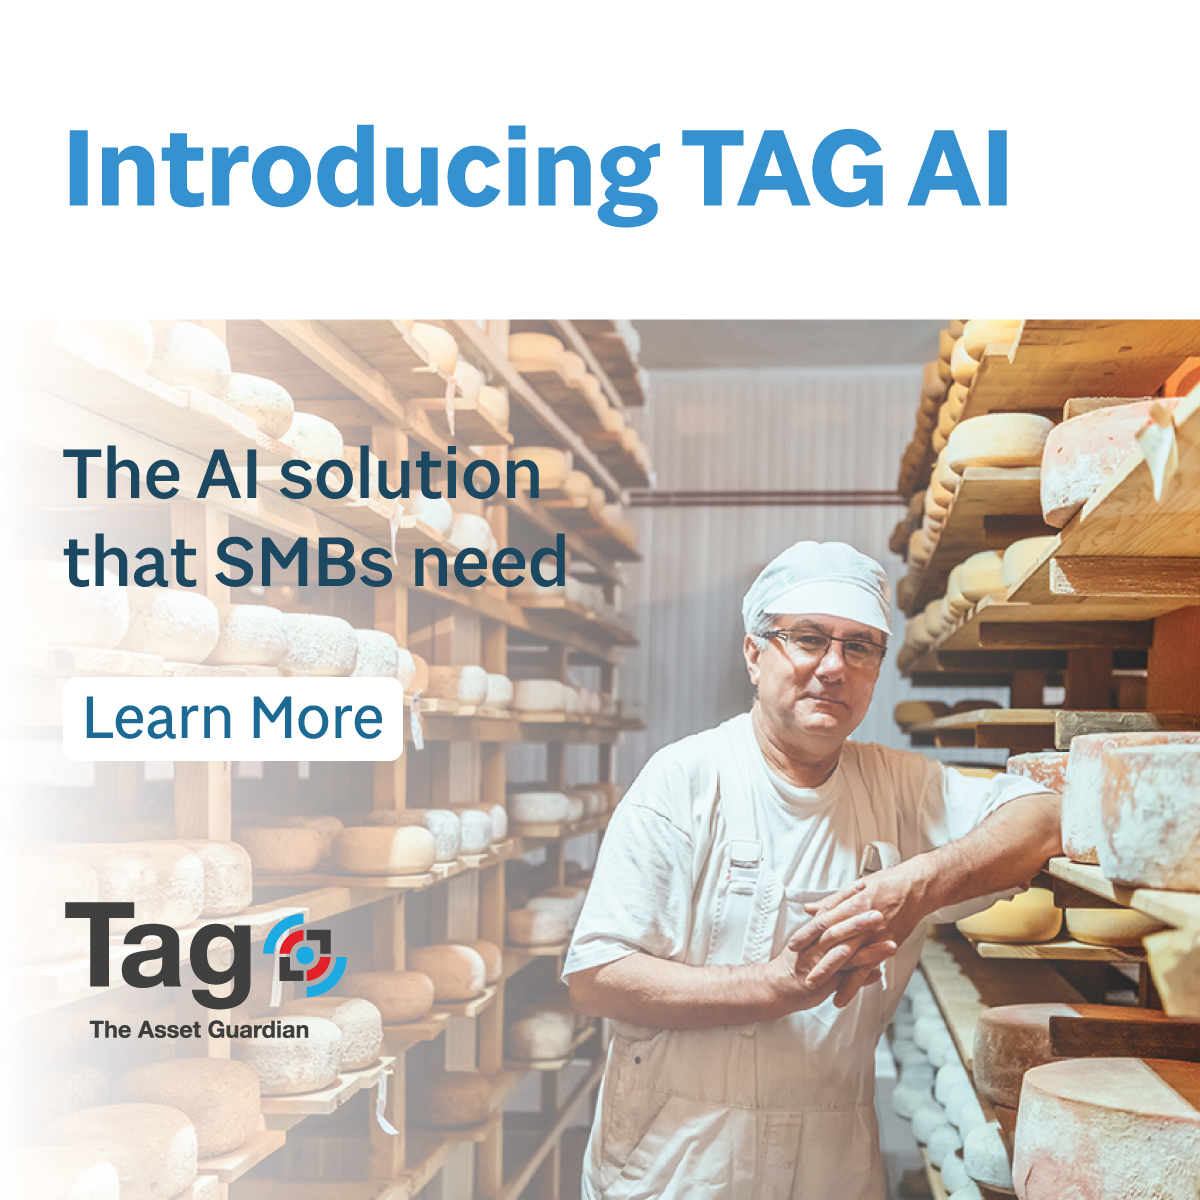 🌟 Attention, #SMB owners! Discover the next level of asset management with #TAG AI – your ultimate AI assistant. 

Ready to revolutionize and further automate your operations? vist.ly/9hk

#EAM #CMMS #MicrosoftBC #DigitalTransformation #InternetofThings #IoT #AI #SME